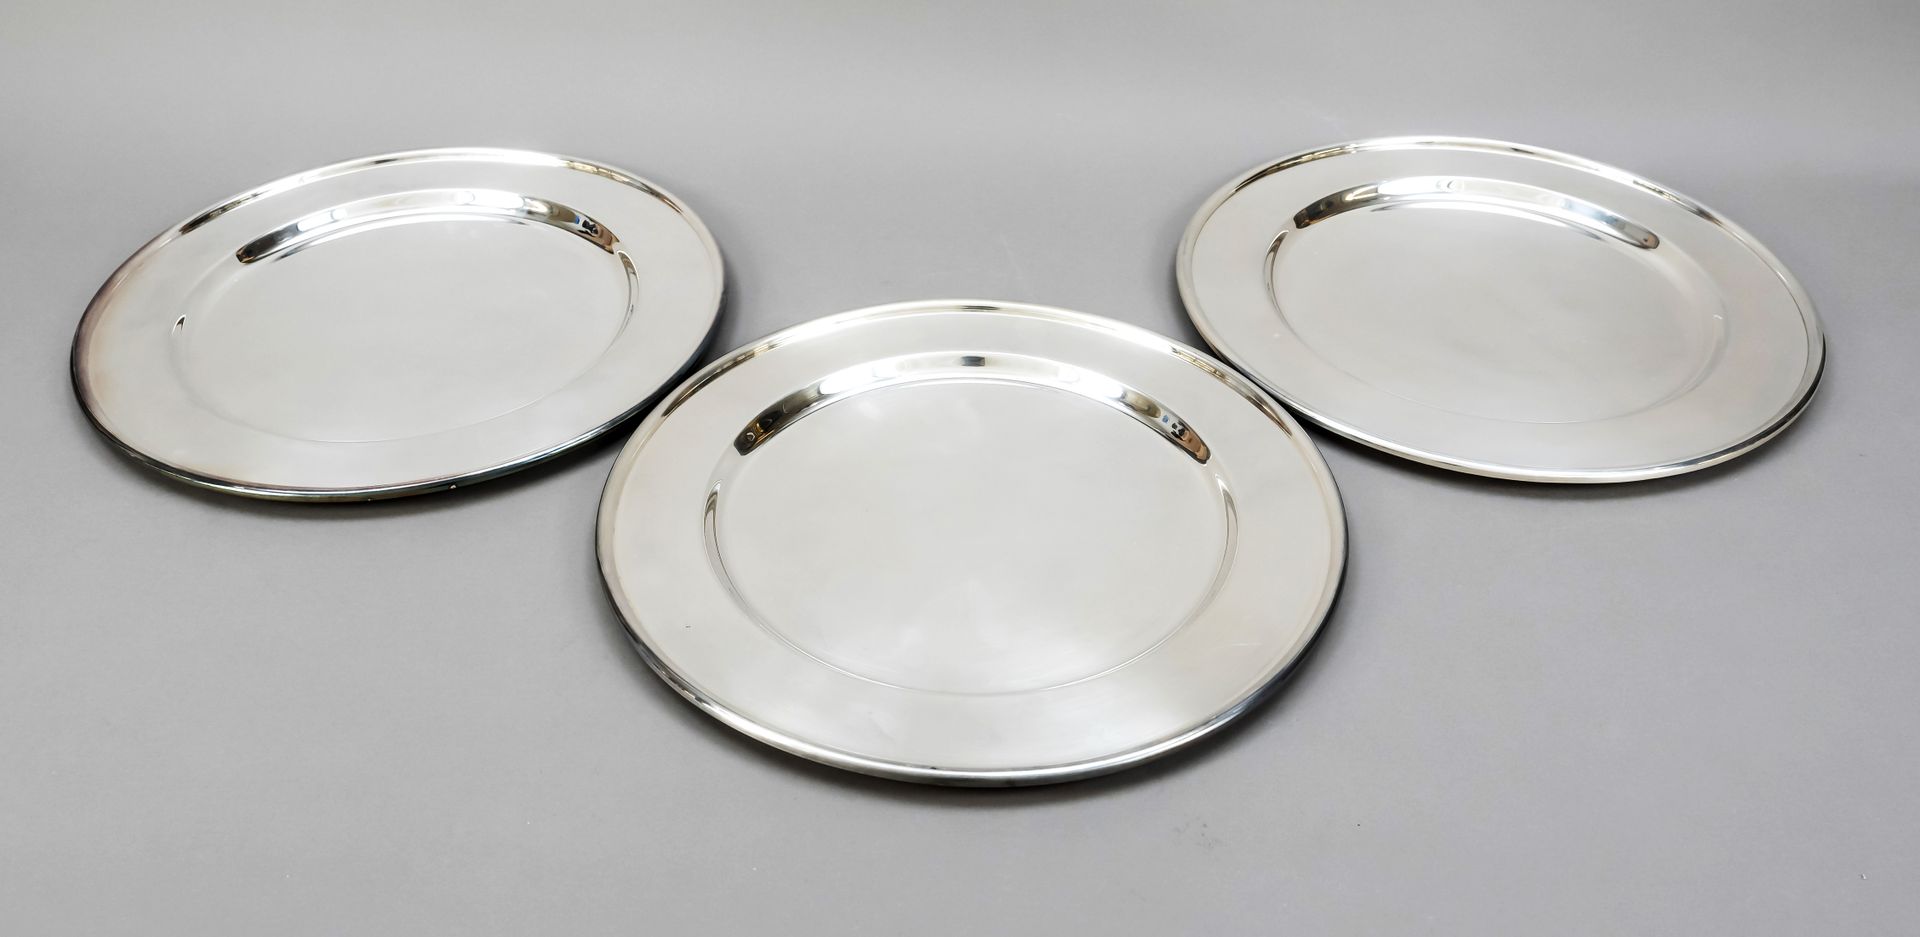 Null Five placemats, Italy, 20th century, sterling silver 925/000, smooth, sligh&hellip;